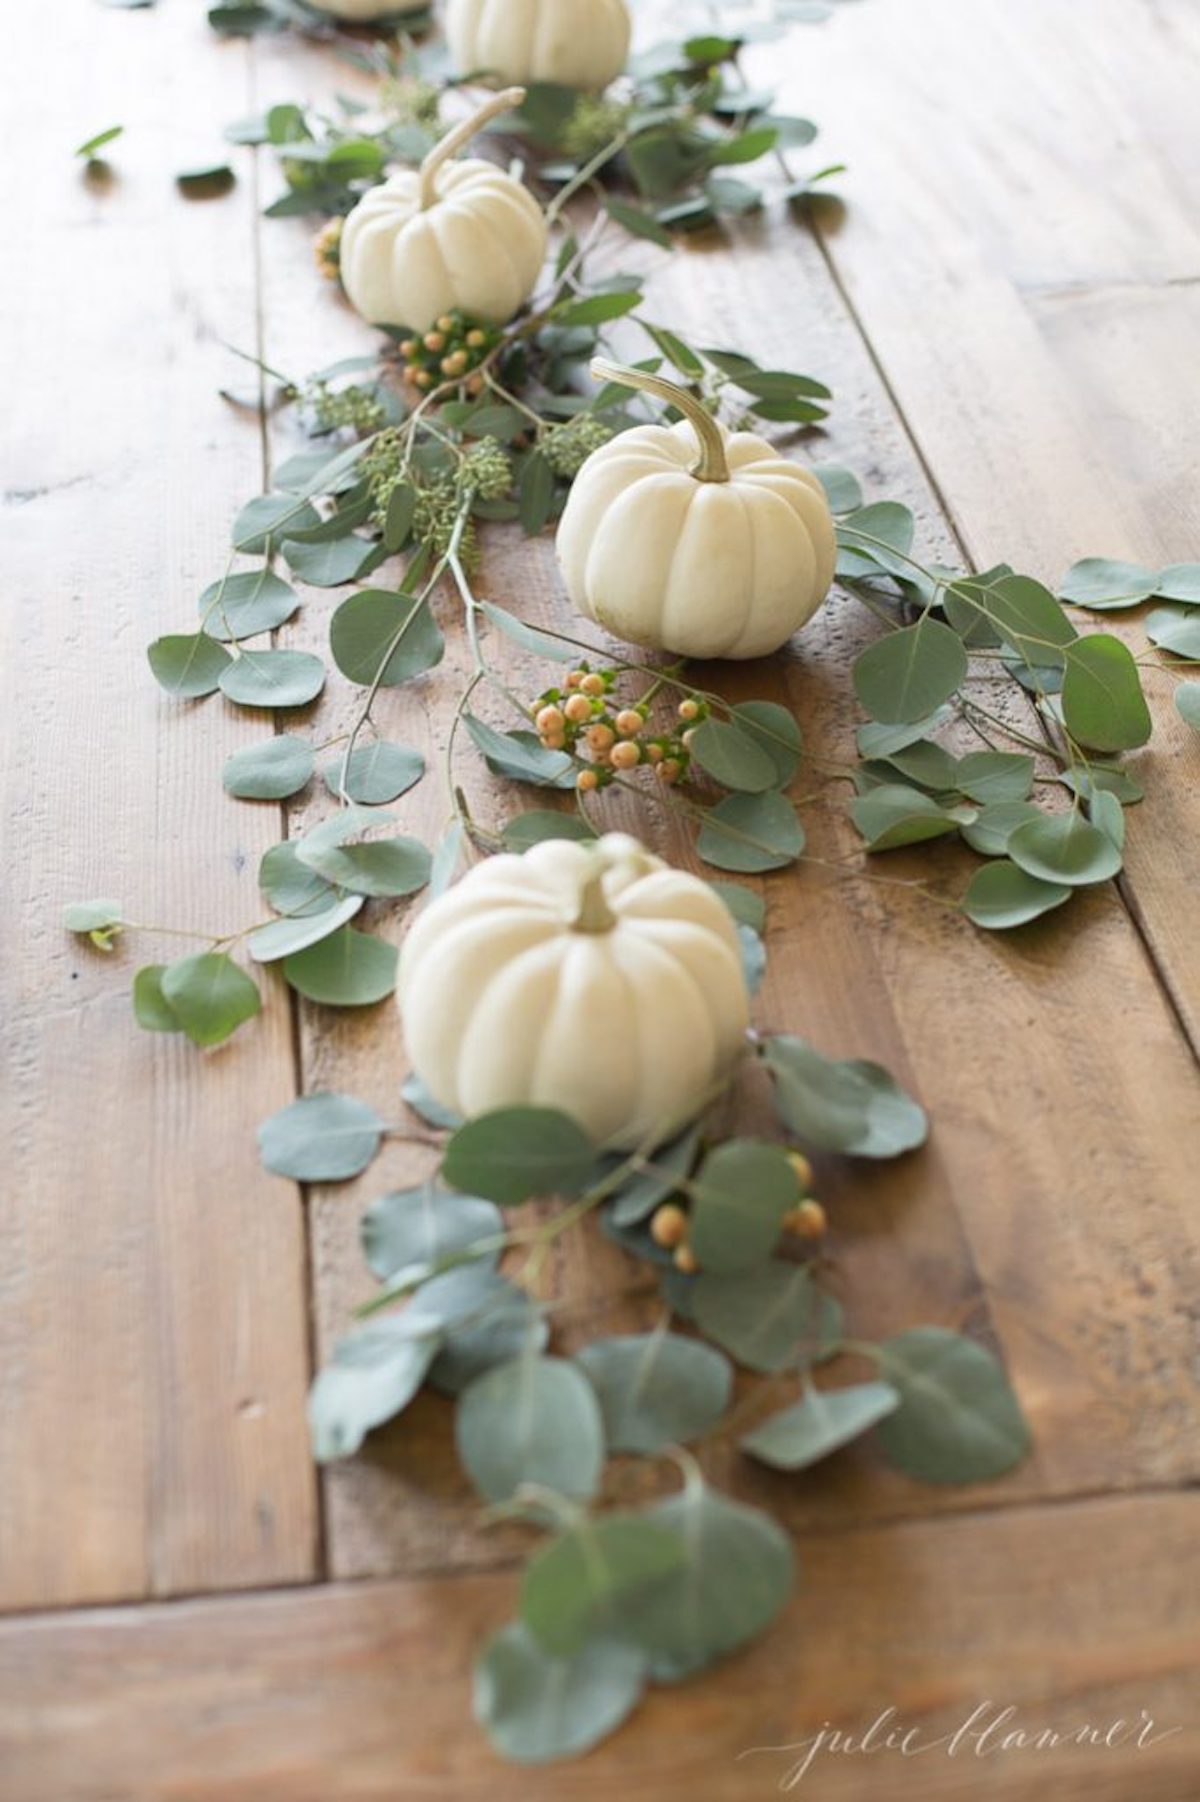 Thanksgiving table decor featuring white pumpkins and eucalyptus leaves on a wooden table.